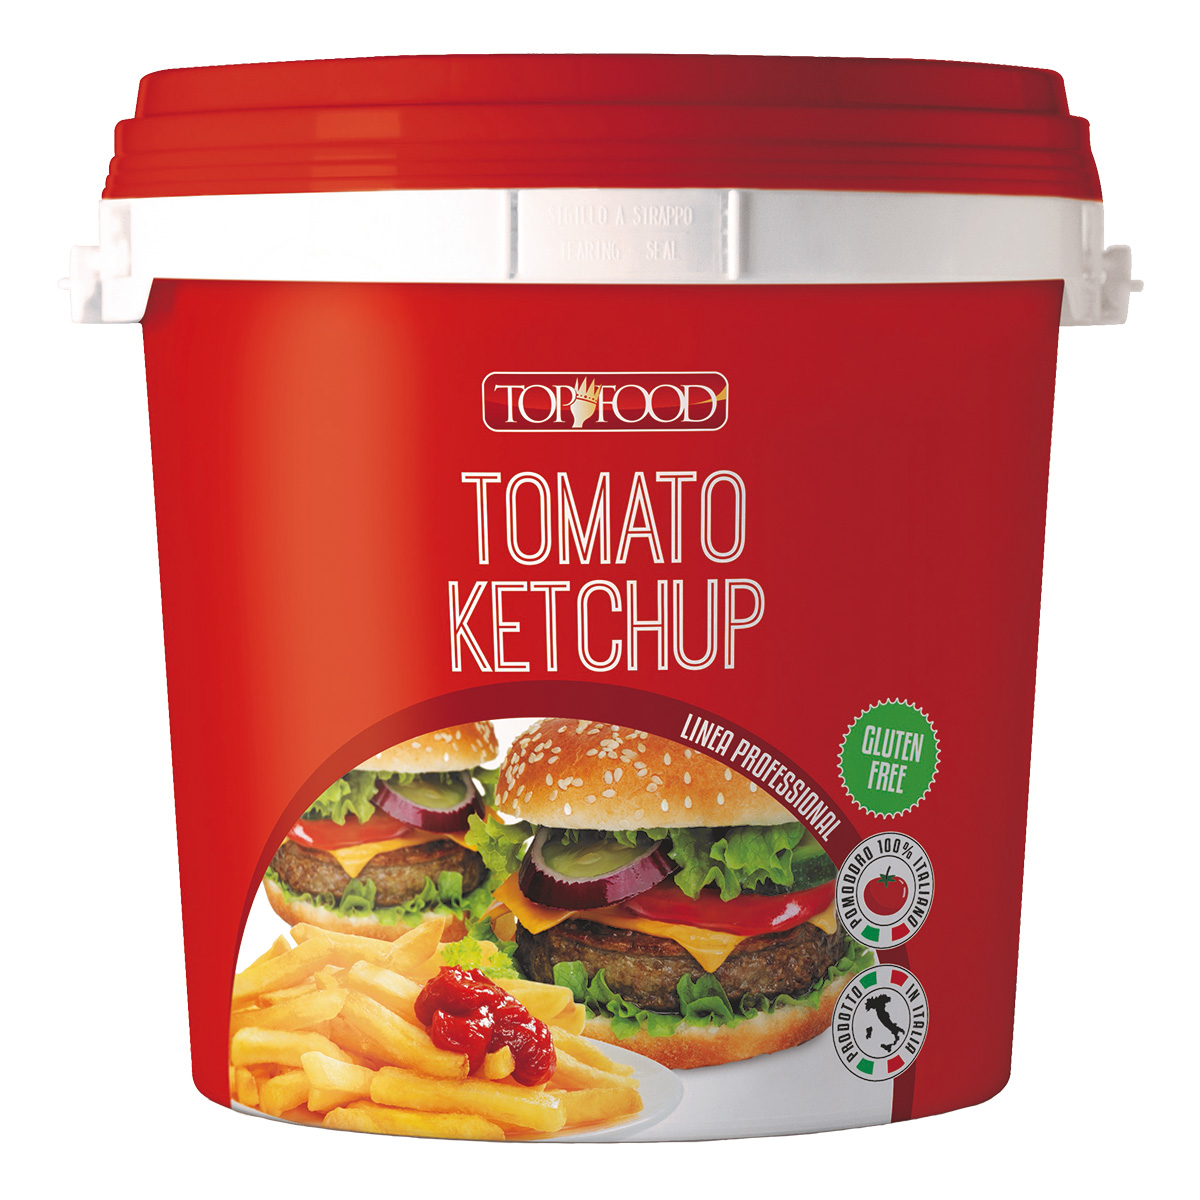 KETCHUP TOMATO Kg.5 TOP S.